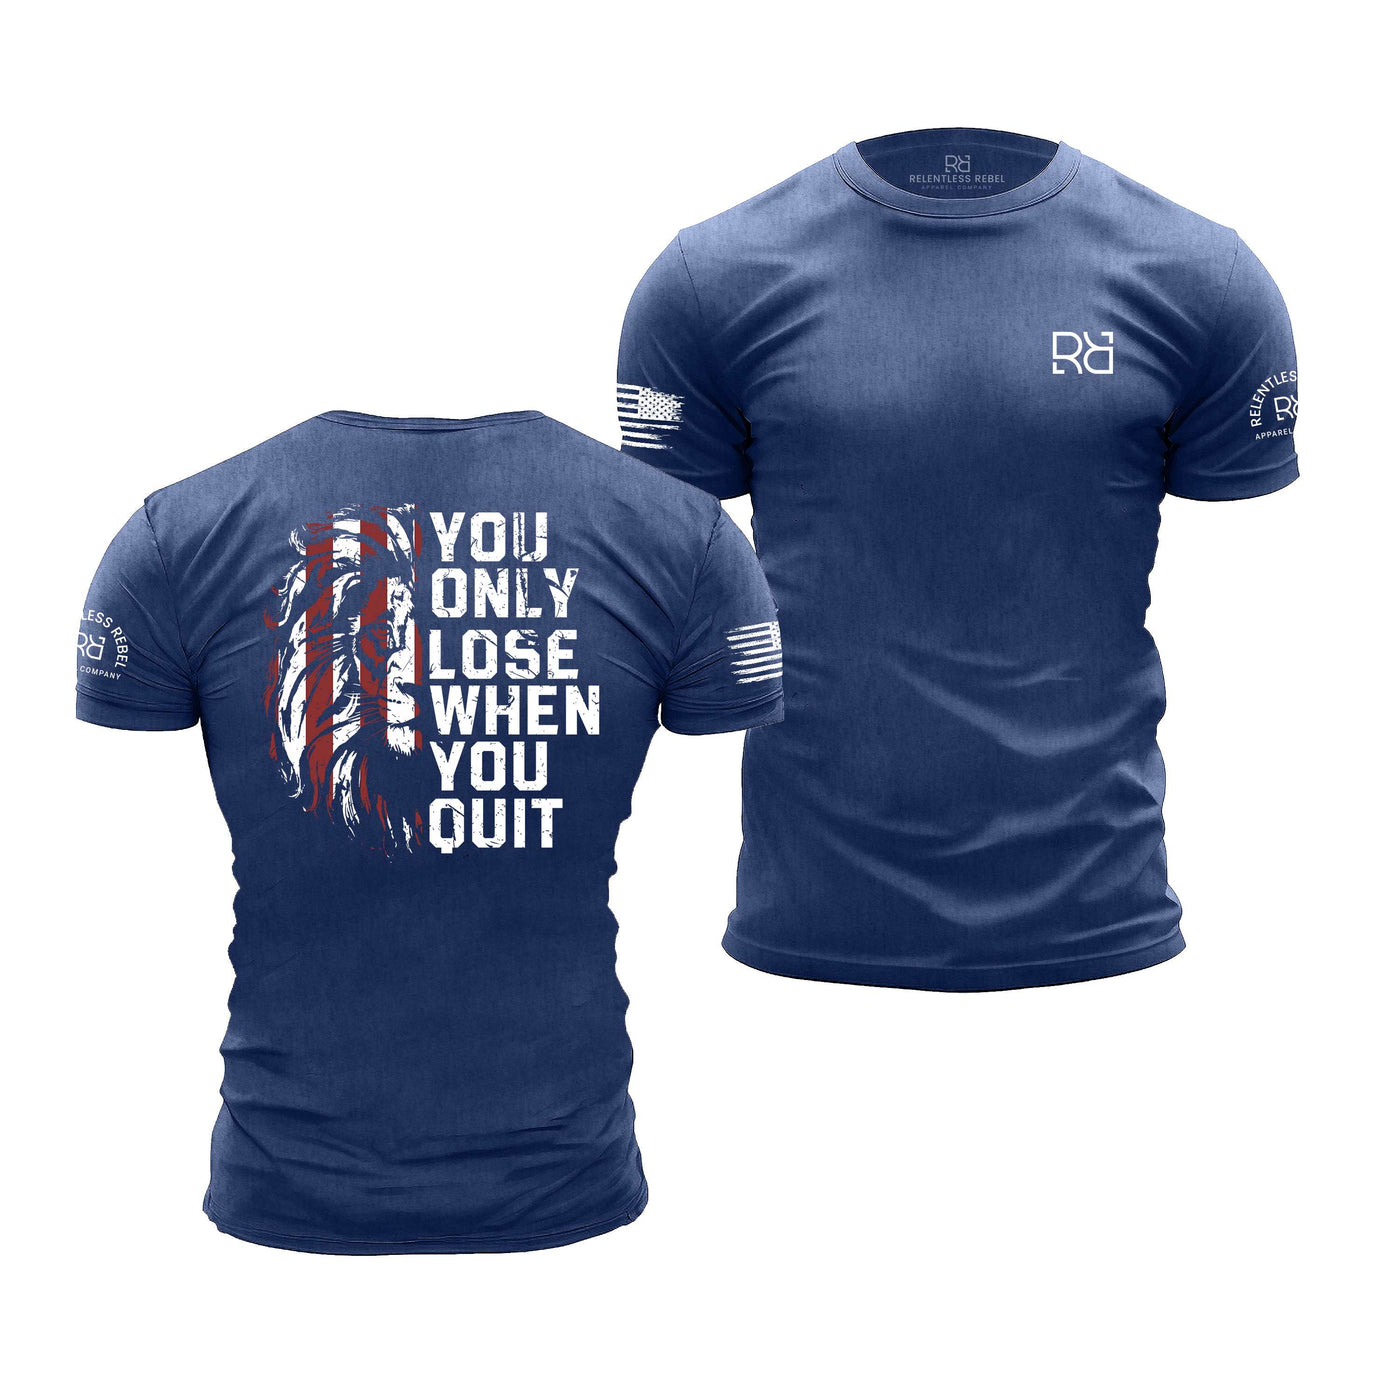 Rebel Blue Men's You Only Lose When You Quit Back Design Tee